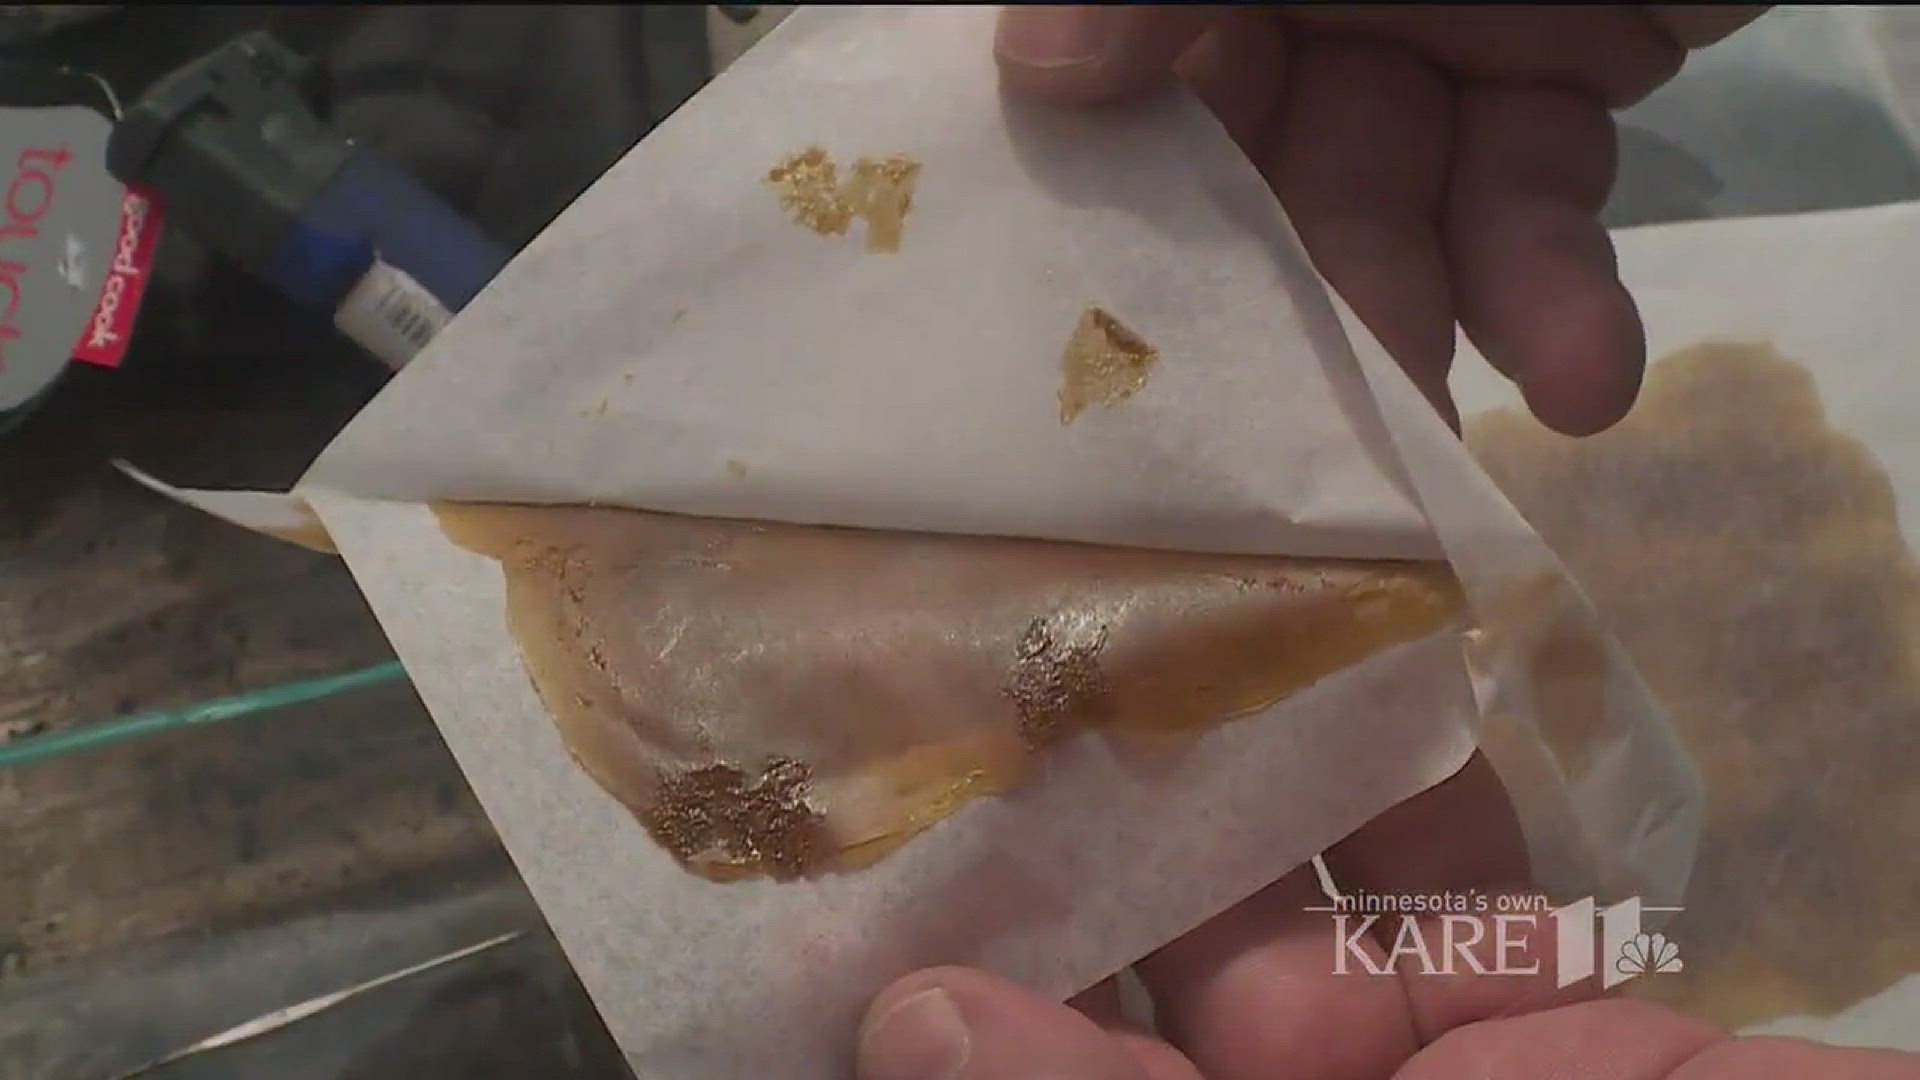 Minnesota seeing growth in highly-concentrated marijuana extract known as wax